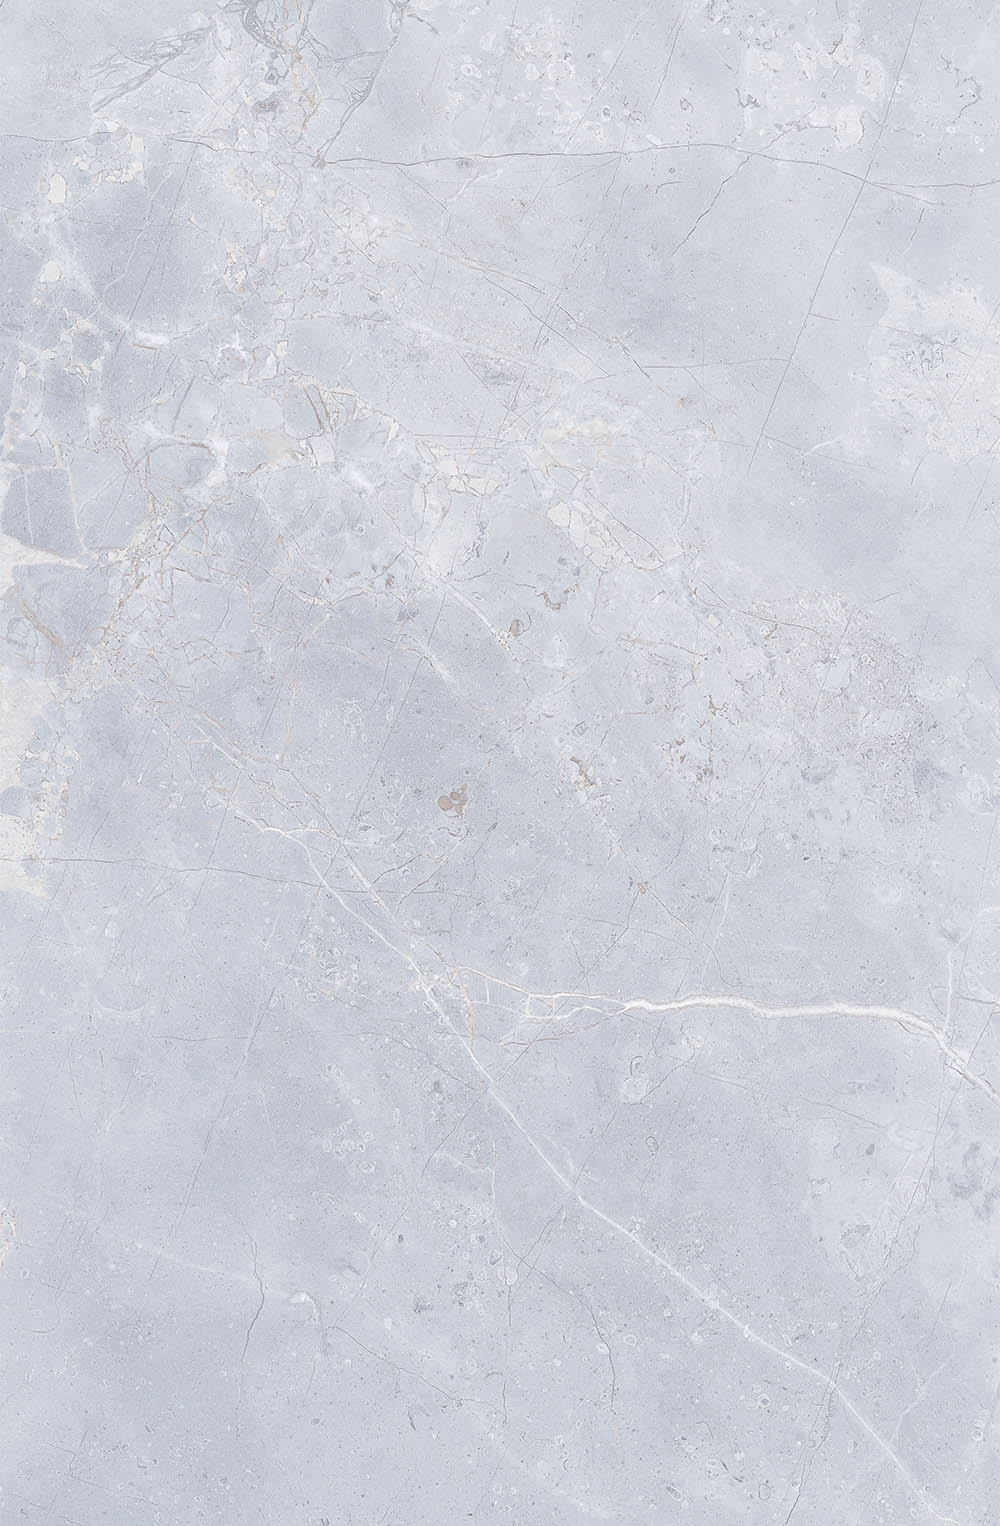 What are the characteristics of thin porcelain tile?